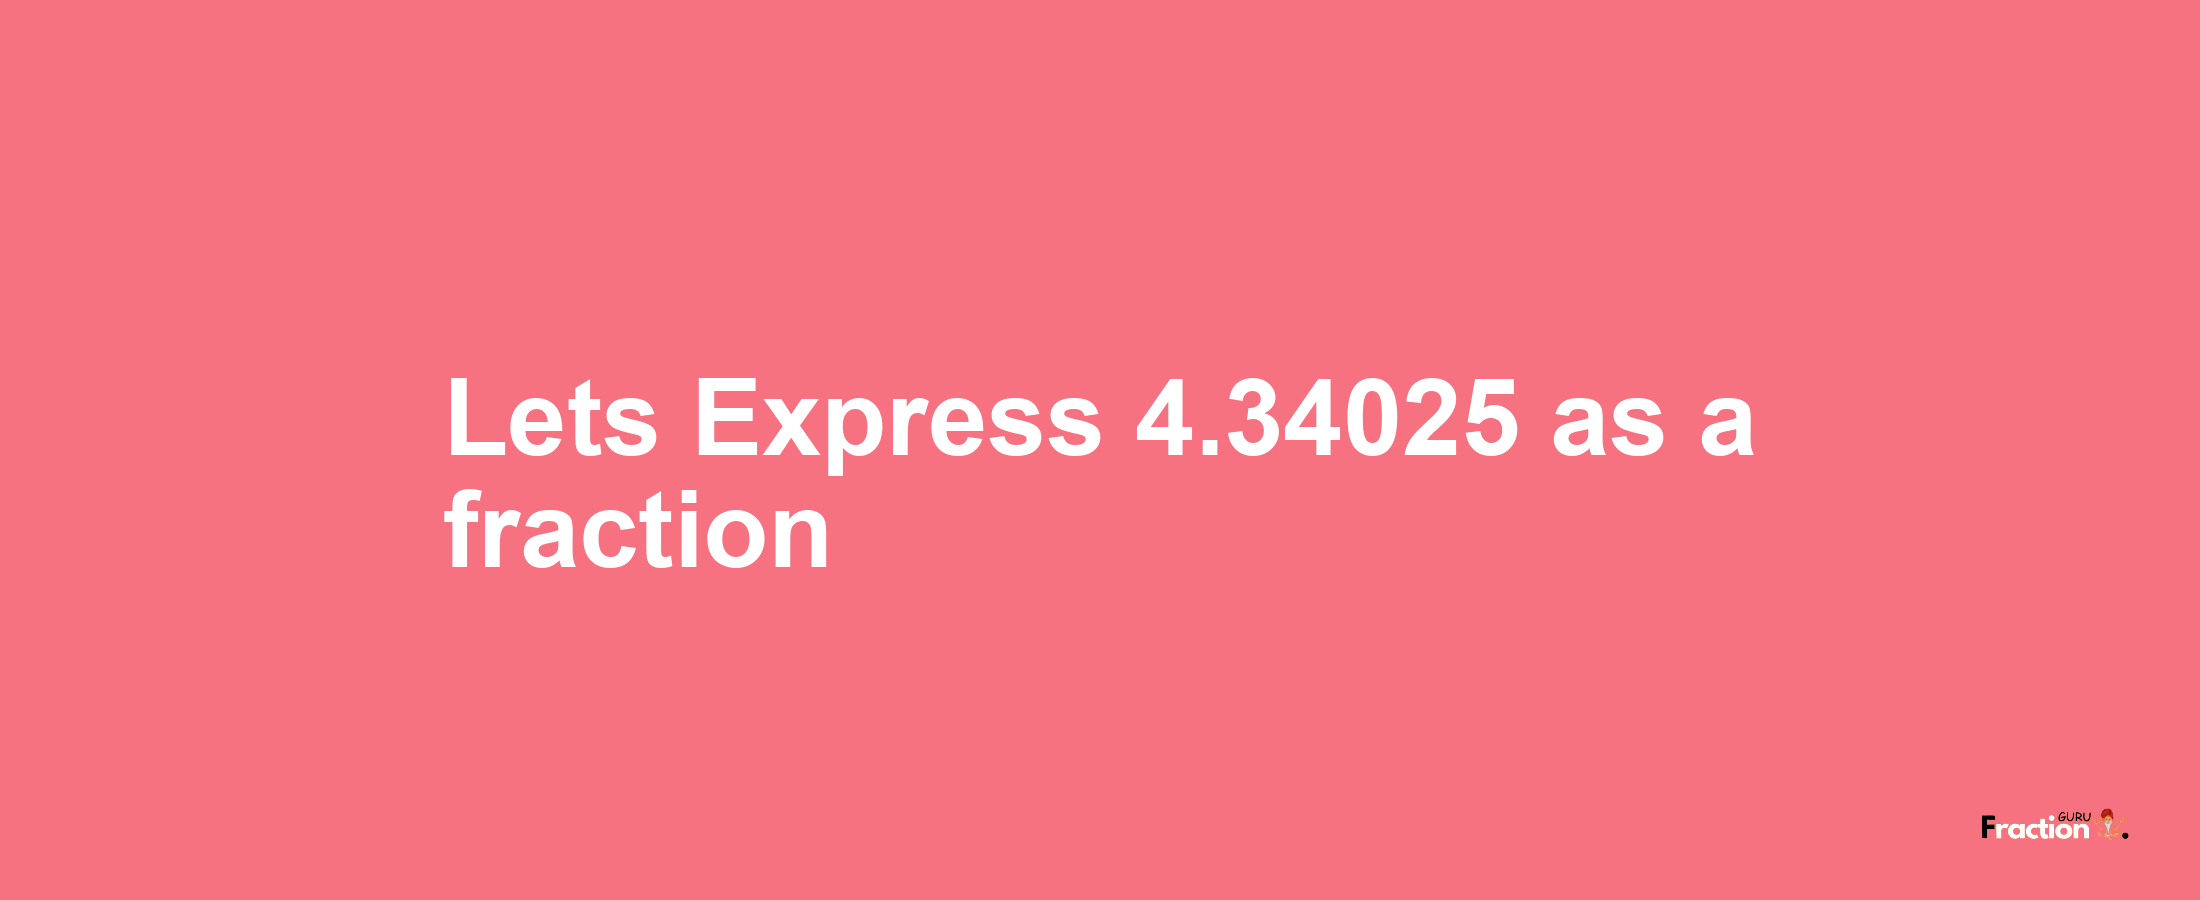 Lets Express 4.34025 as afraction